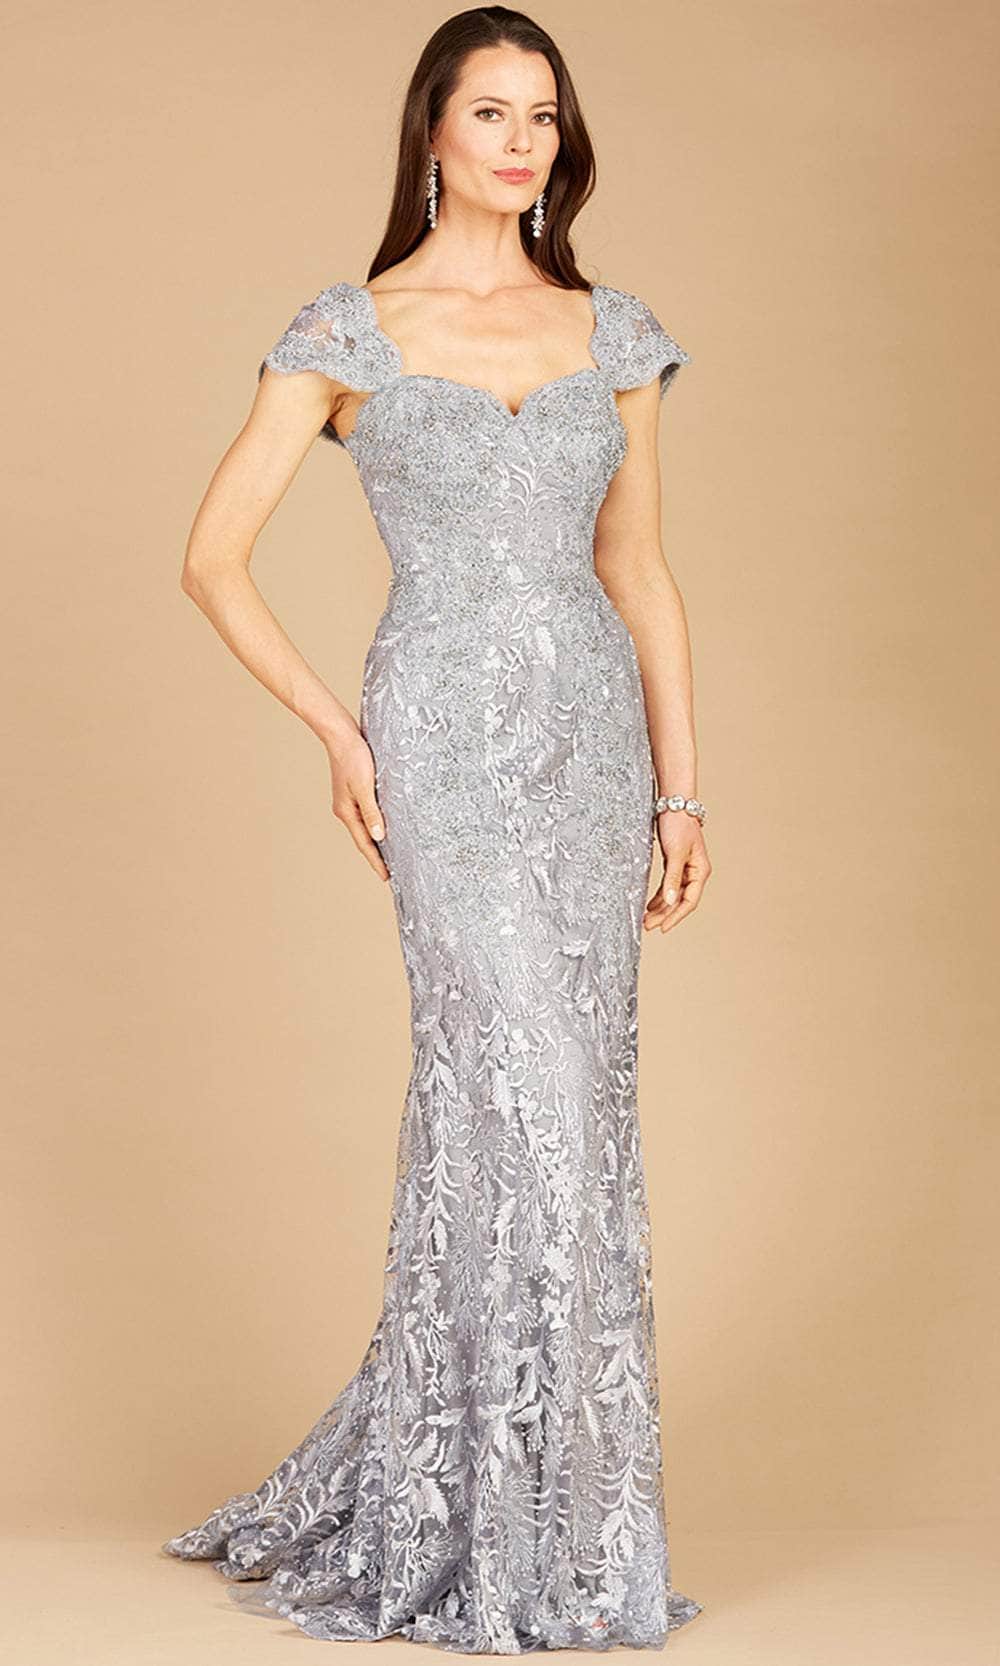 Lara Dresses 29295 - Embroidered Cap Sleeved Gown
